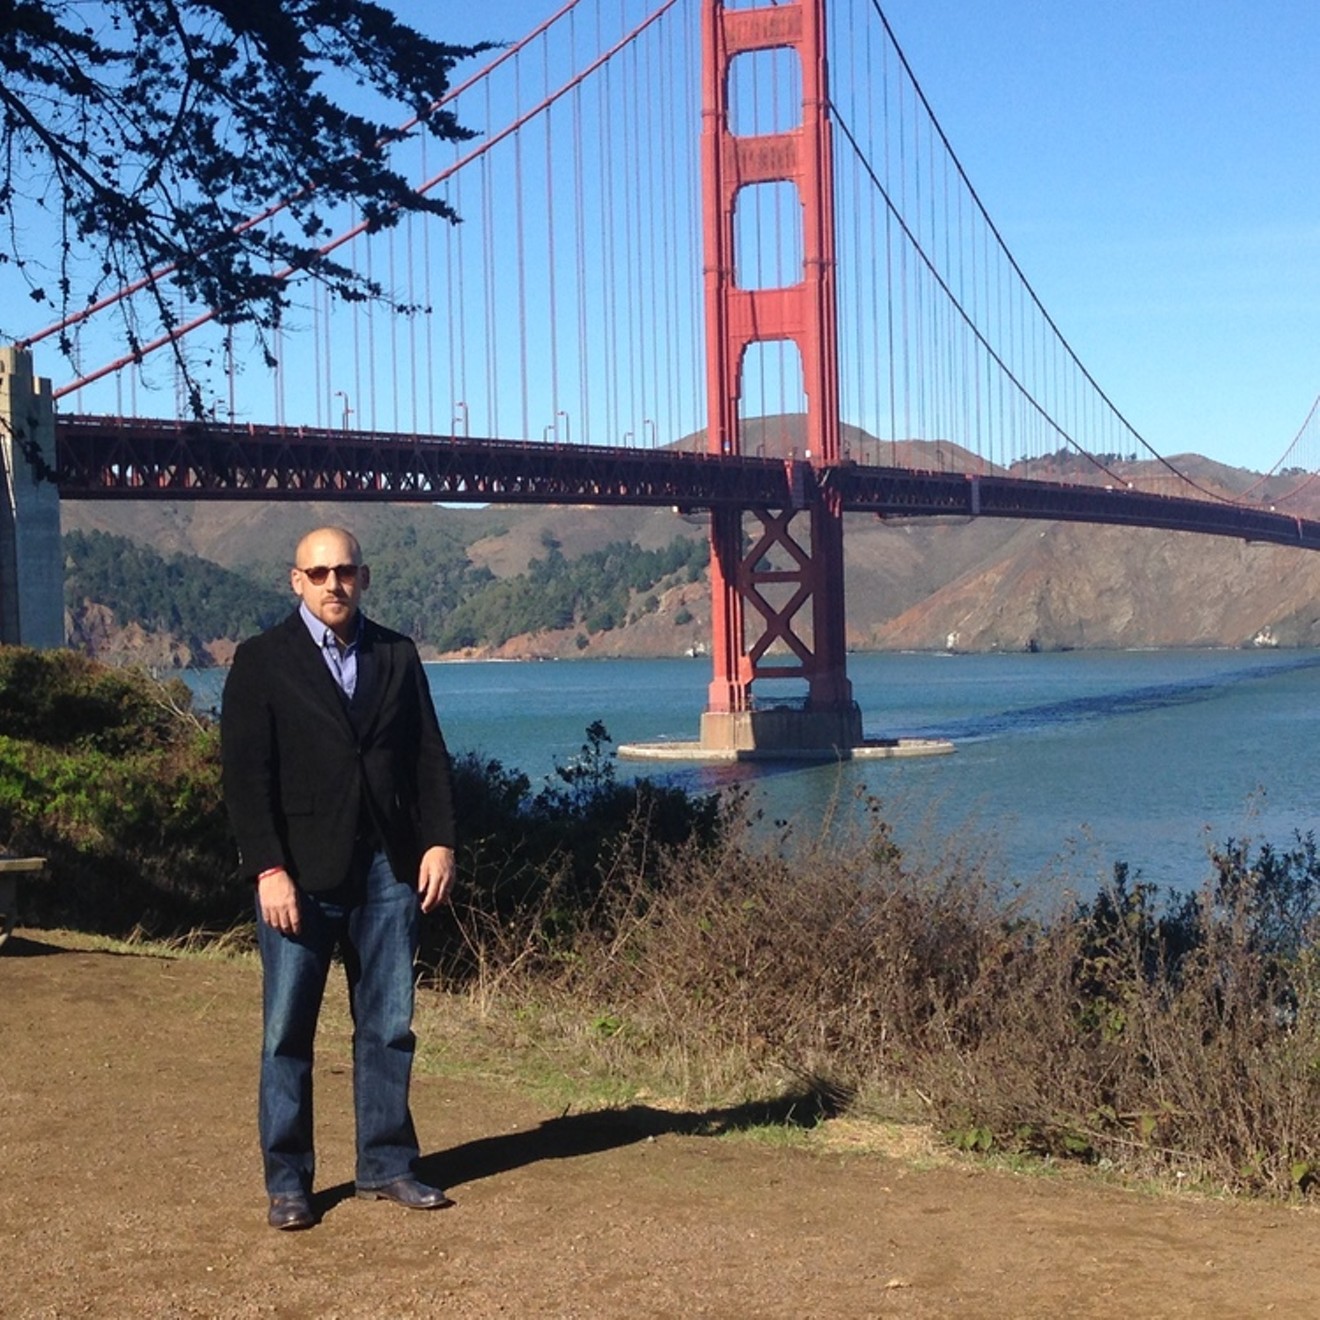 Kevin Hines revisits the Golden Gate Bridge in San Francisco, where he attempted suicide in September 2000.